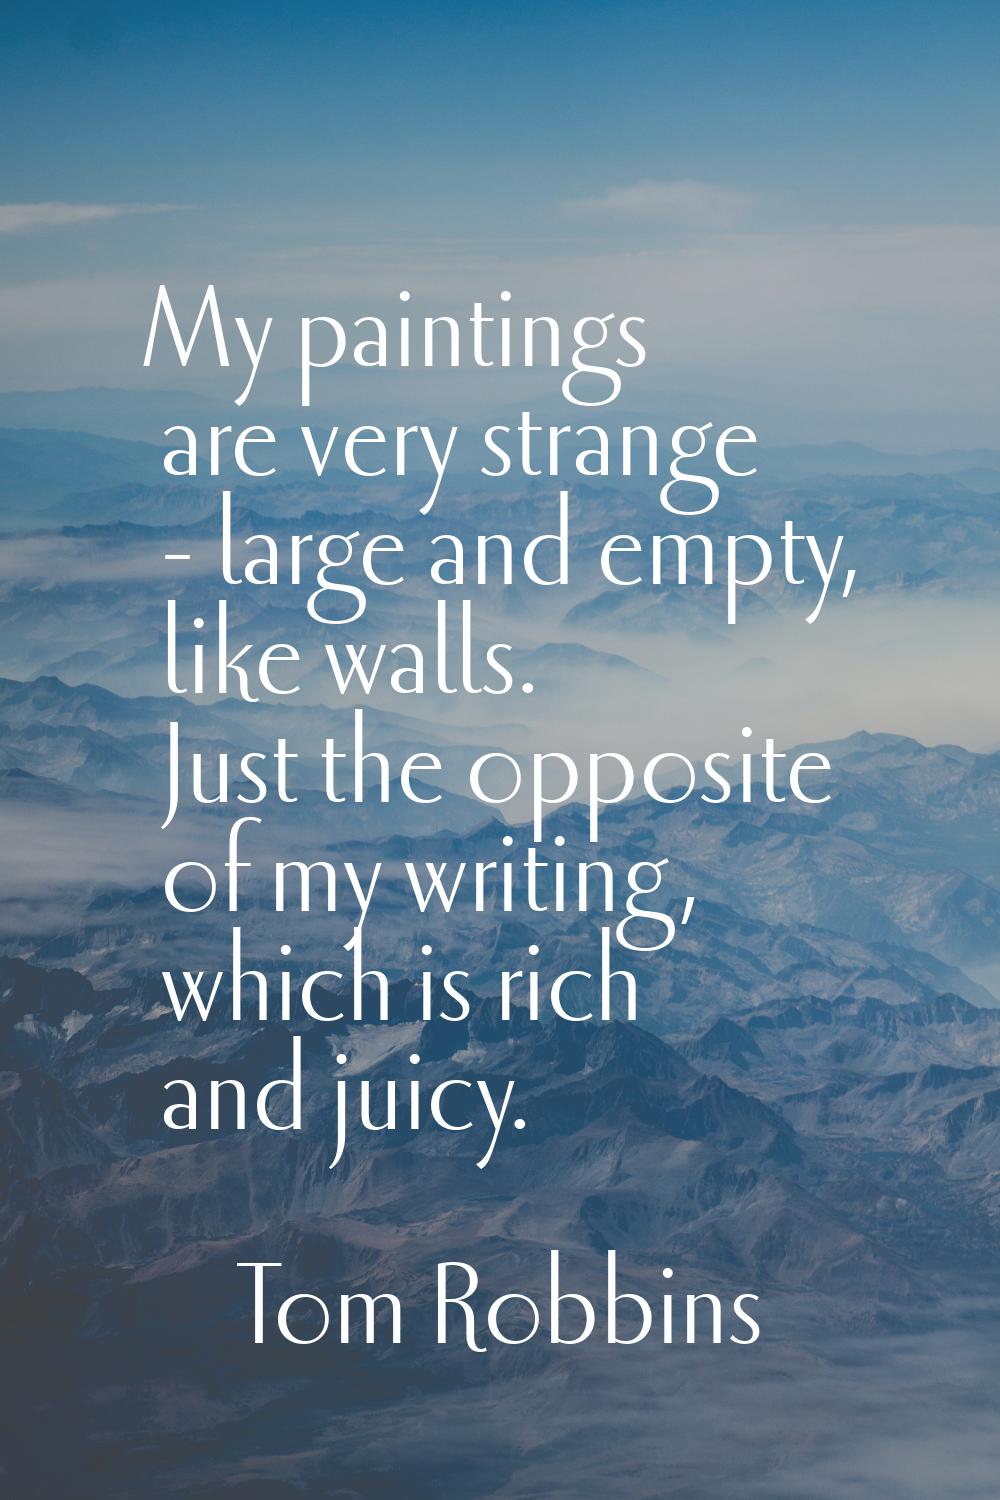 My paintings are very strange - large and empty, like walls. Just the opposite of my writing, which